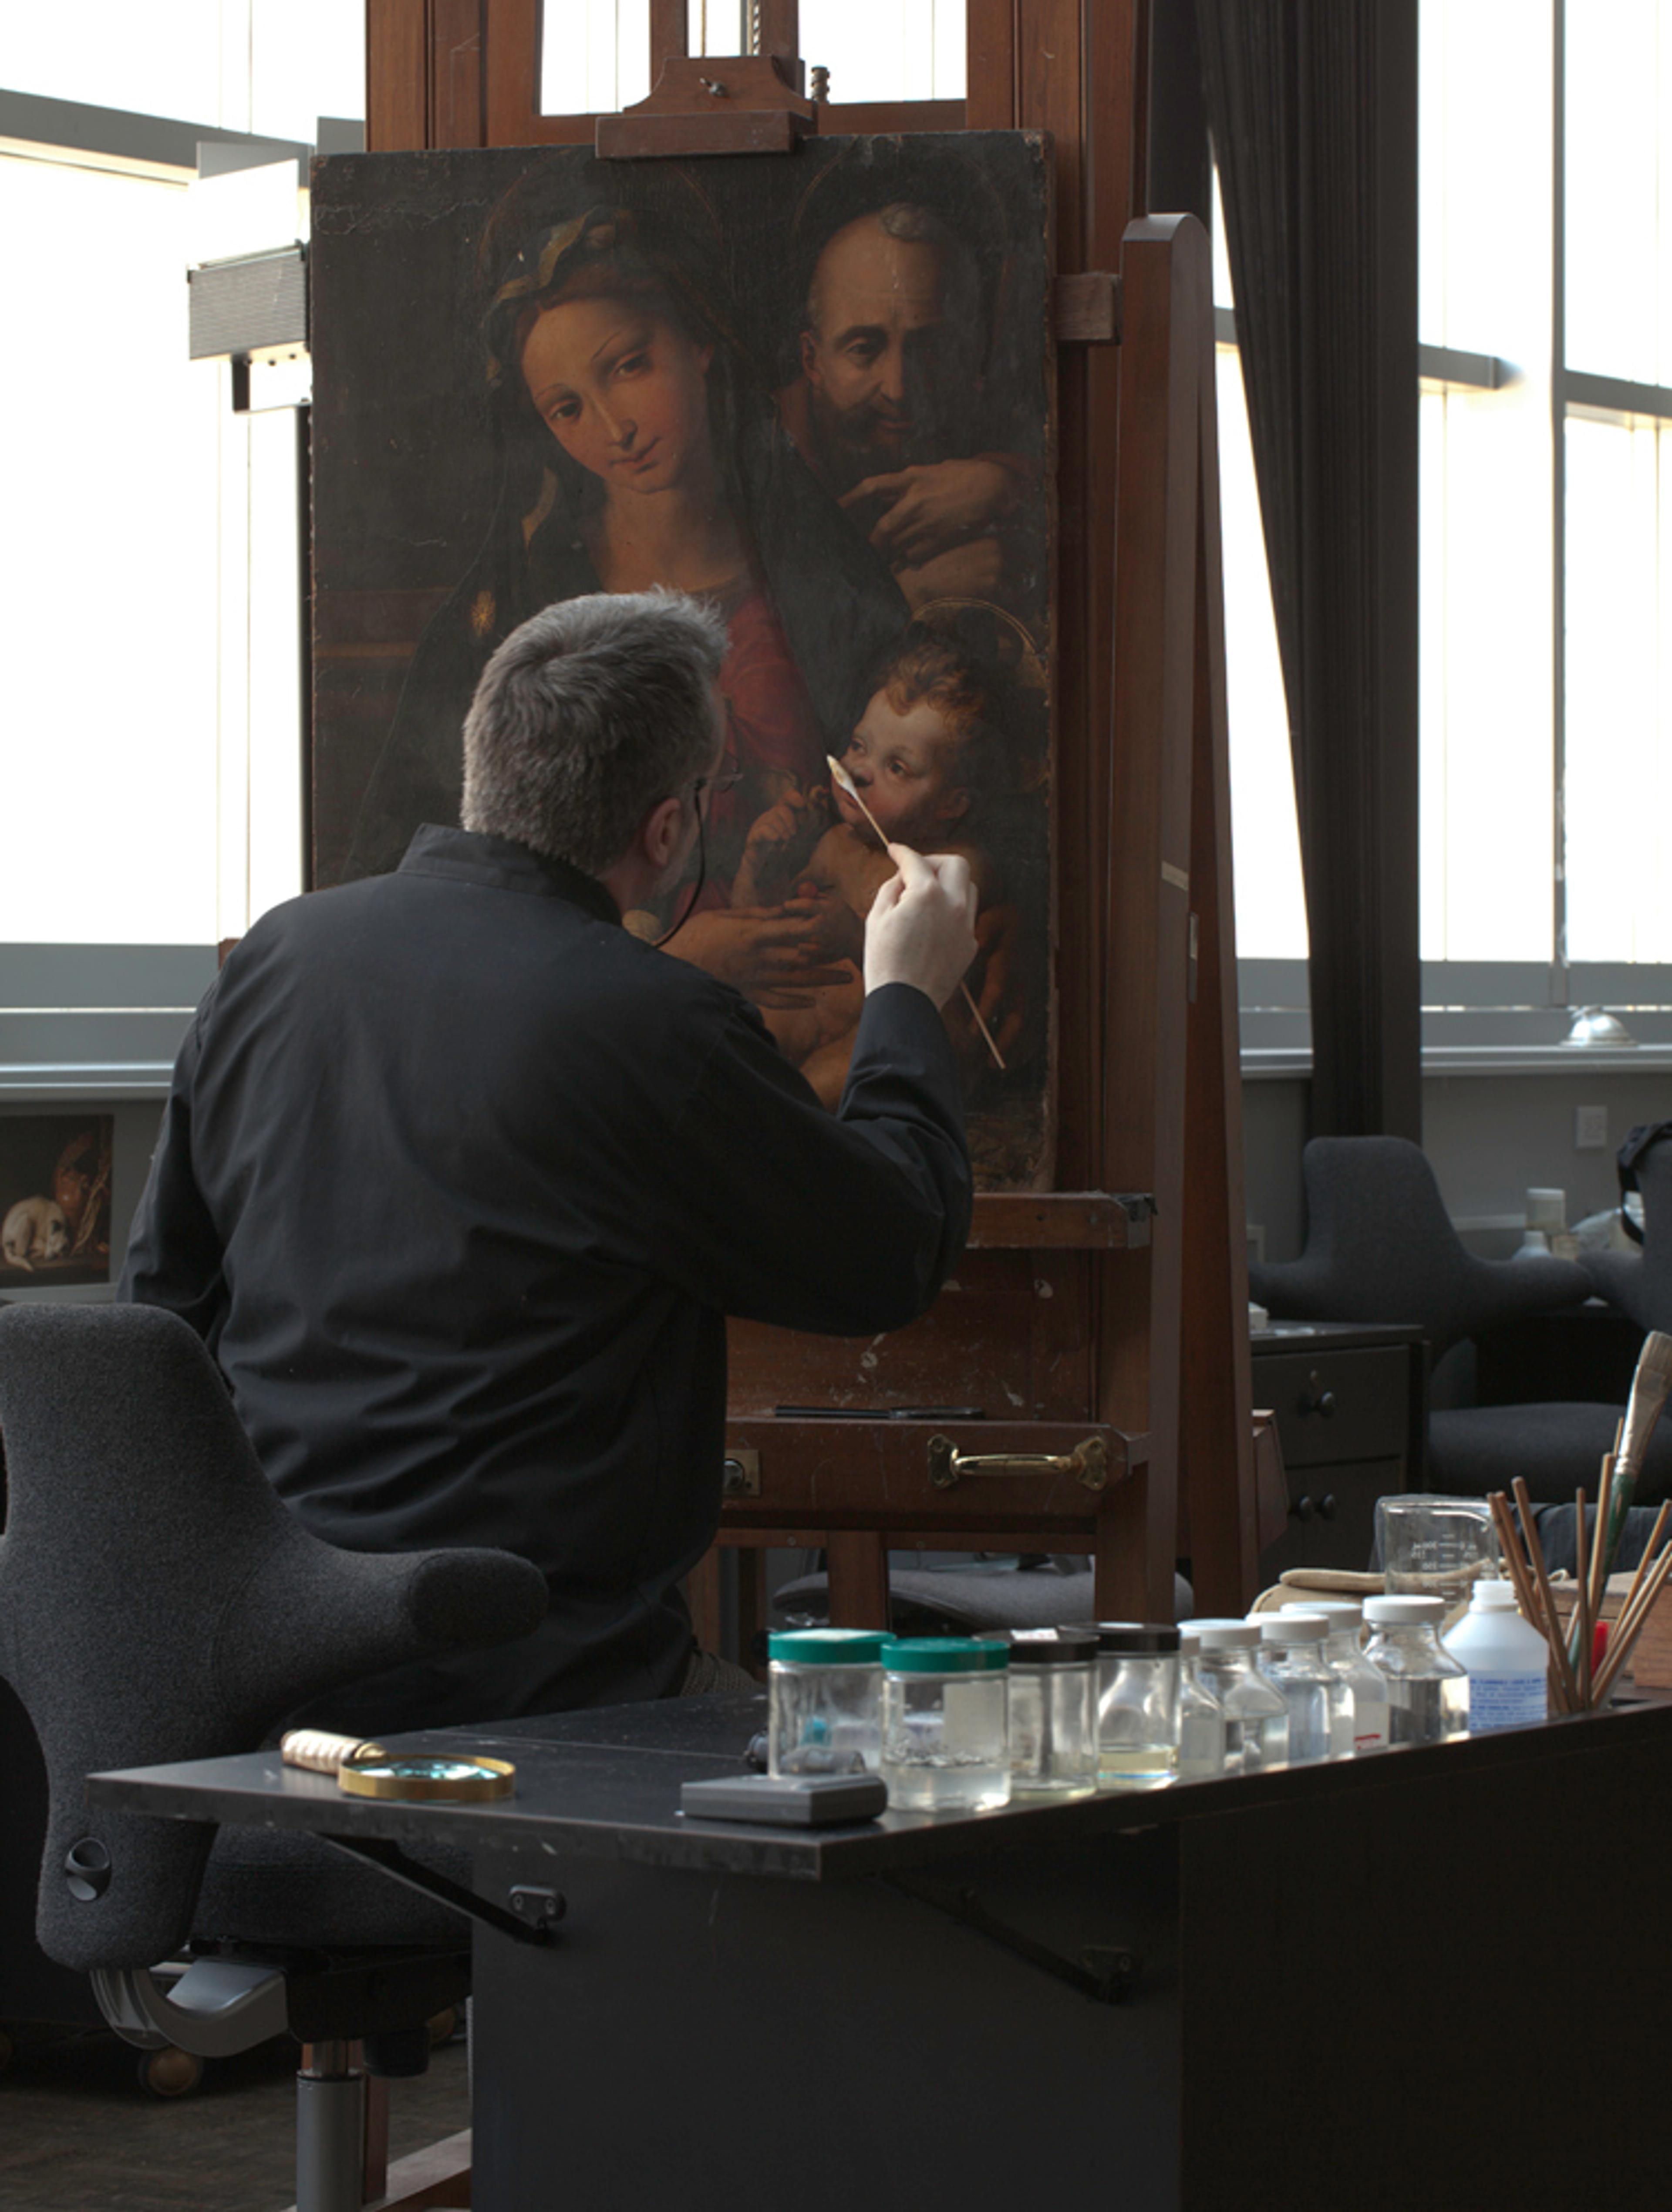 A man works with his back turned to conserve an oil painting.